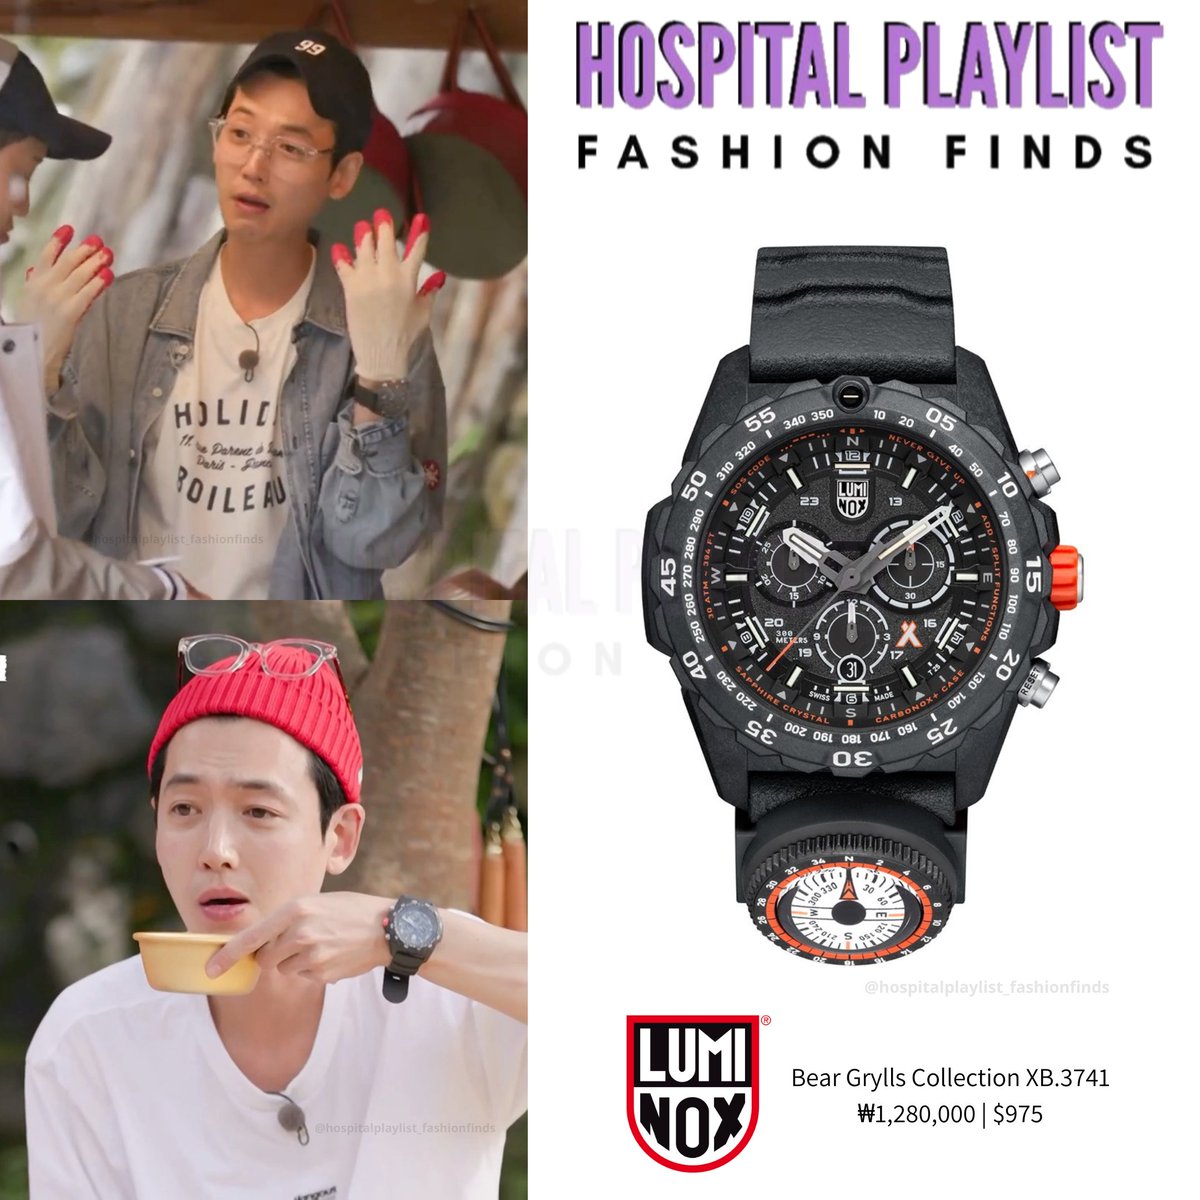 3 Meals A Day - Doctors Ep. 1-2
⠀⠀⠀⠀⠀⠀
Jung KyungHo’s watch from LUMINOX
⌚️ Bear Grylls Collection XB.3741 (₩1,280,000 | $975)

#3MealsADay_Doctors #WiseMountainVillageLife
#슬기로운산촌생활

#정경호 #정경호패션 #슬기로운의사생활 #JungKyungho #HPFFJungKyungHo